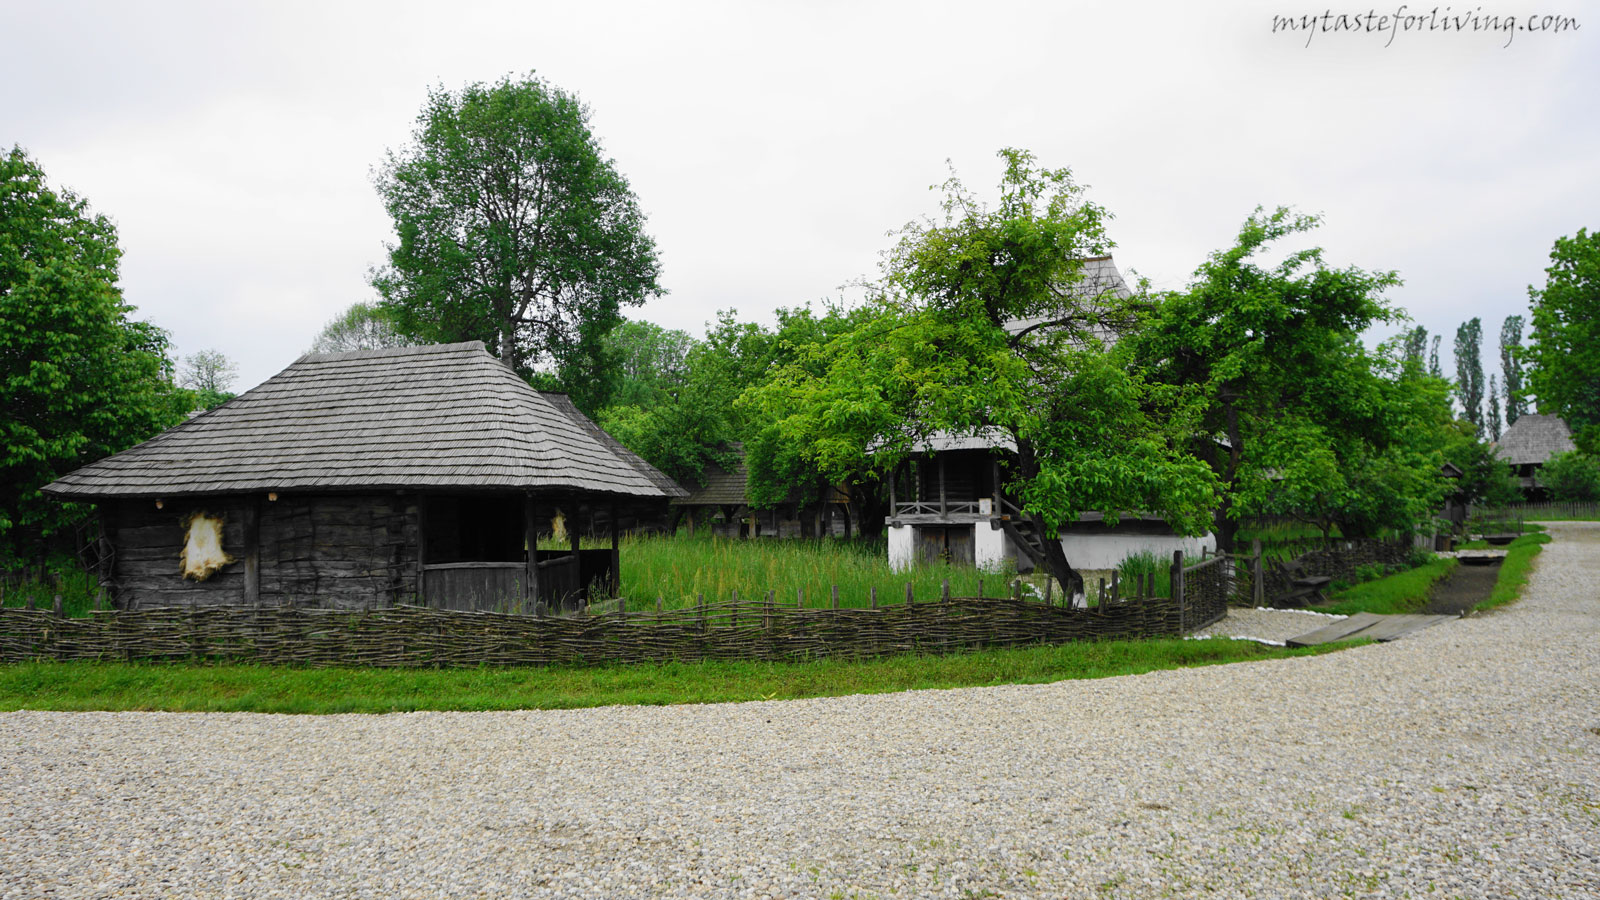 The Golesti Museum is located 10 km from Pitesti, on the left bank of the Arges river, in the village of Golesti, Romania.